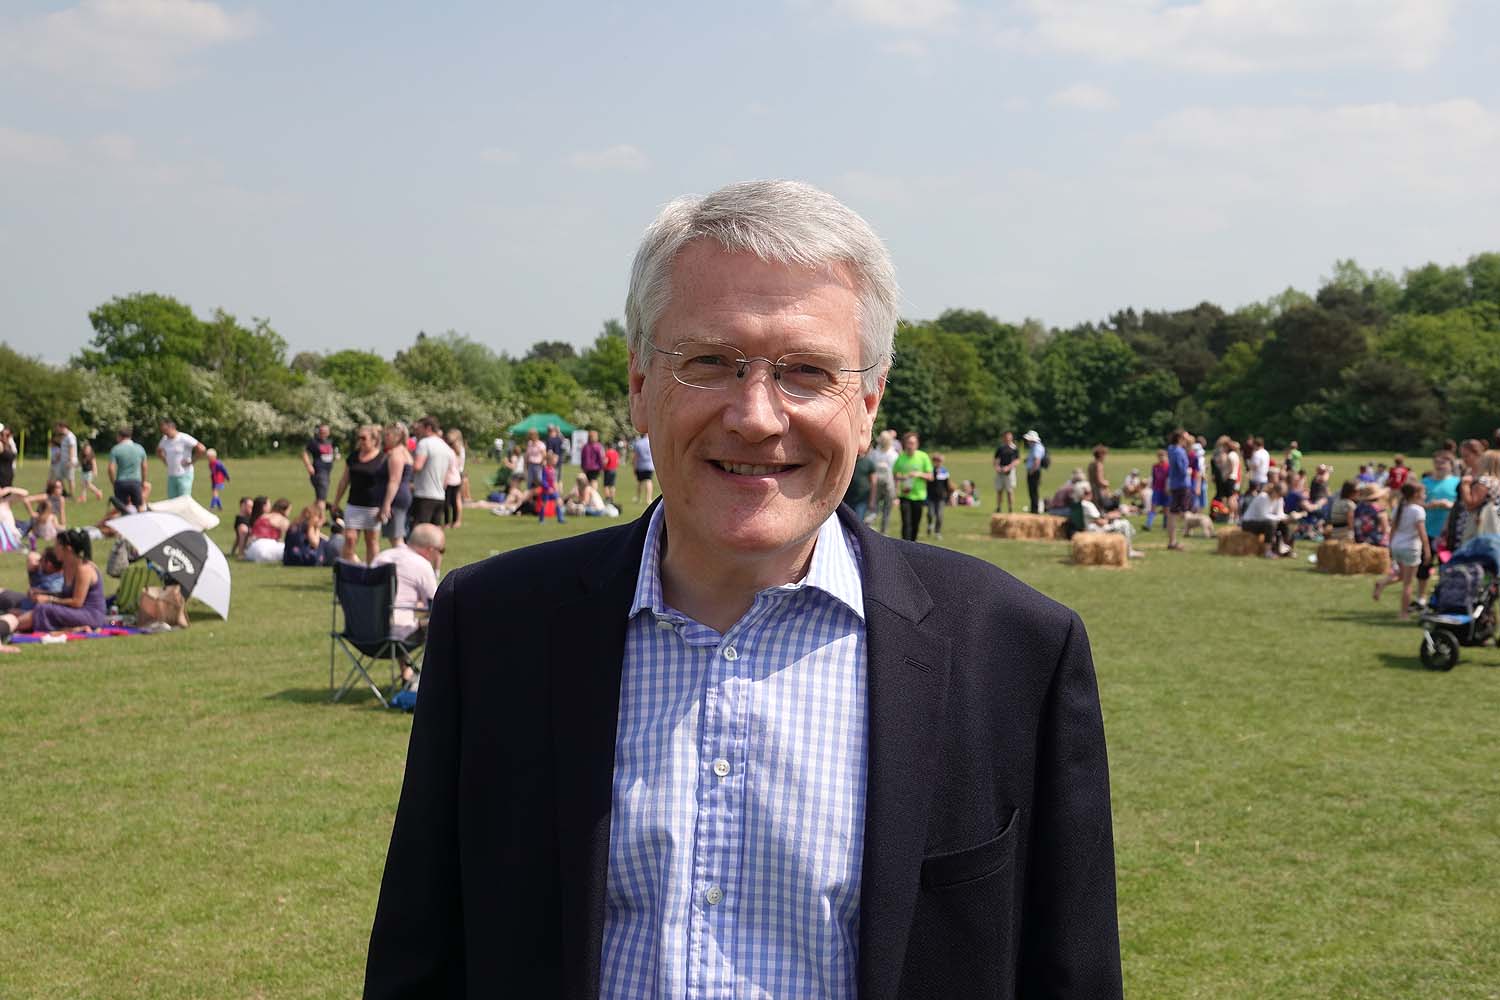 MP to host shoppers surgery in Knaresborough